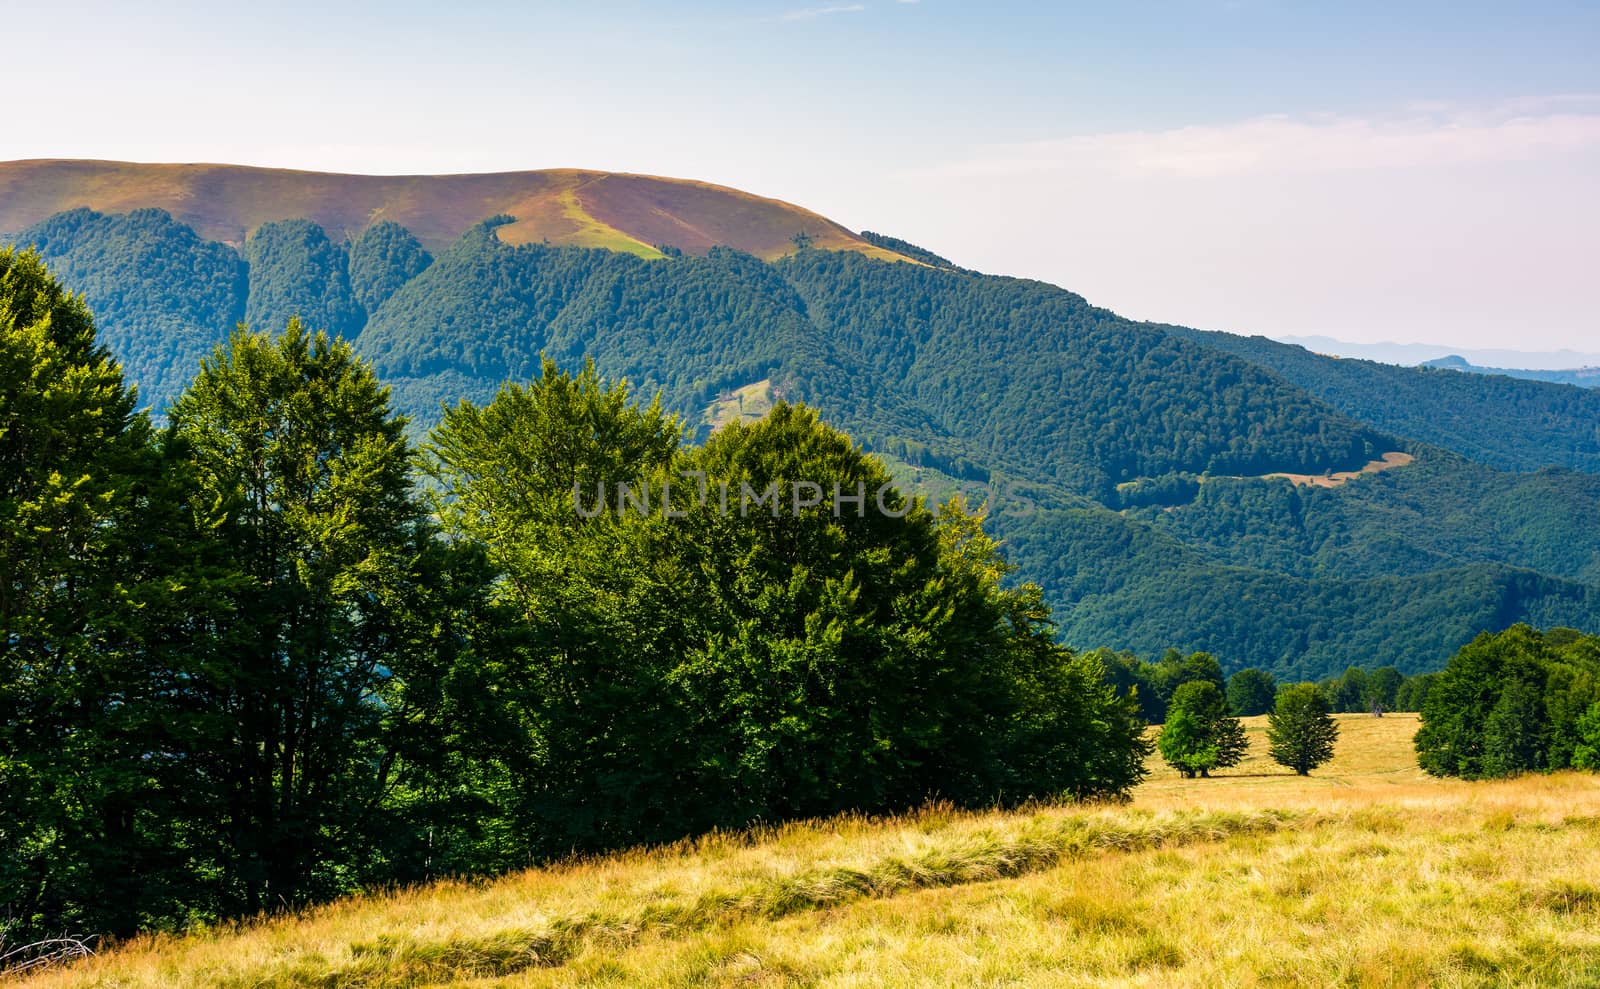 forested hills of Carpathian mountains in summer. Apetska mountain in the distance